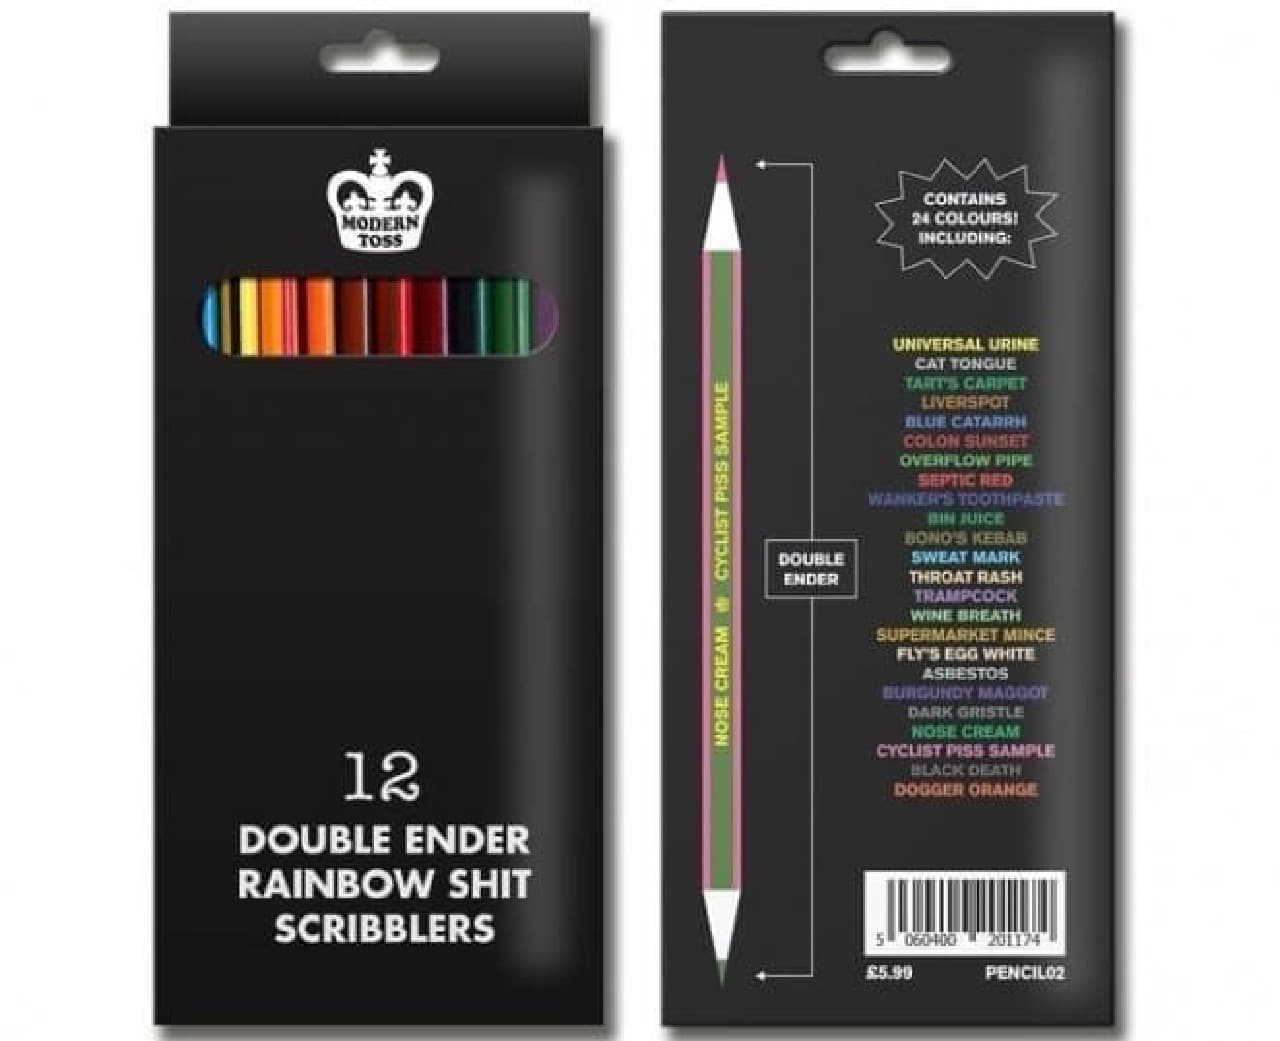 Colored pencils "12 Double Ender Rainbow Shit Scribblers"